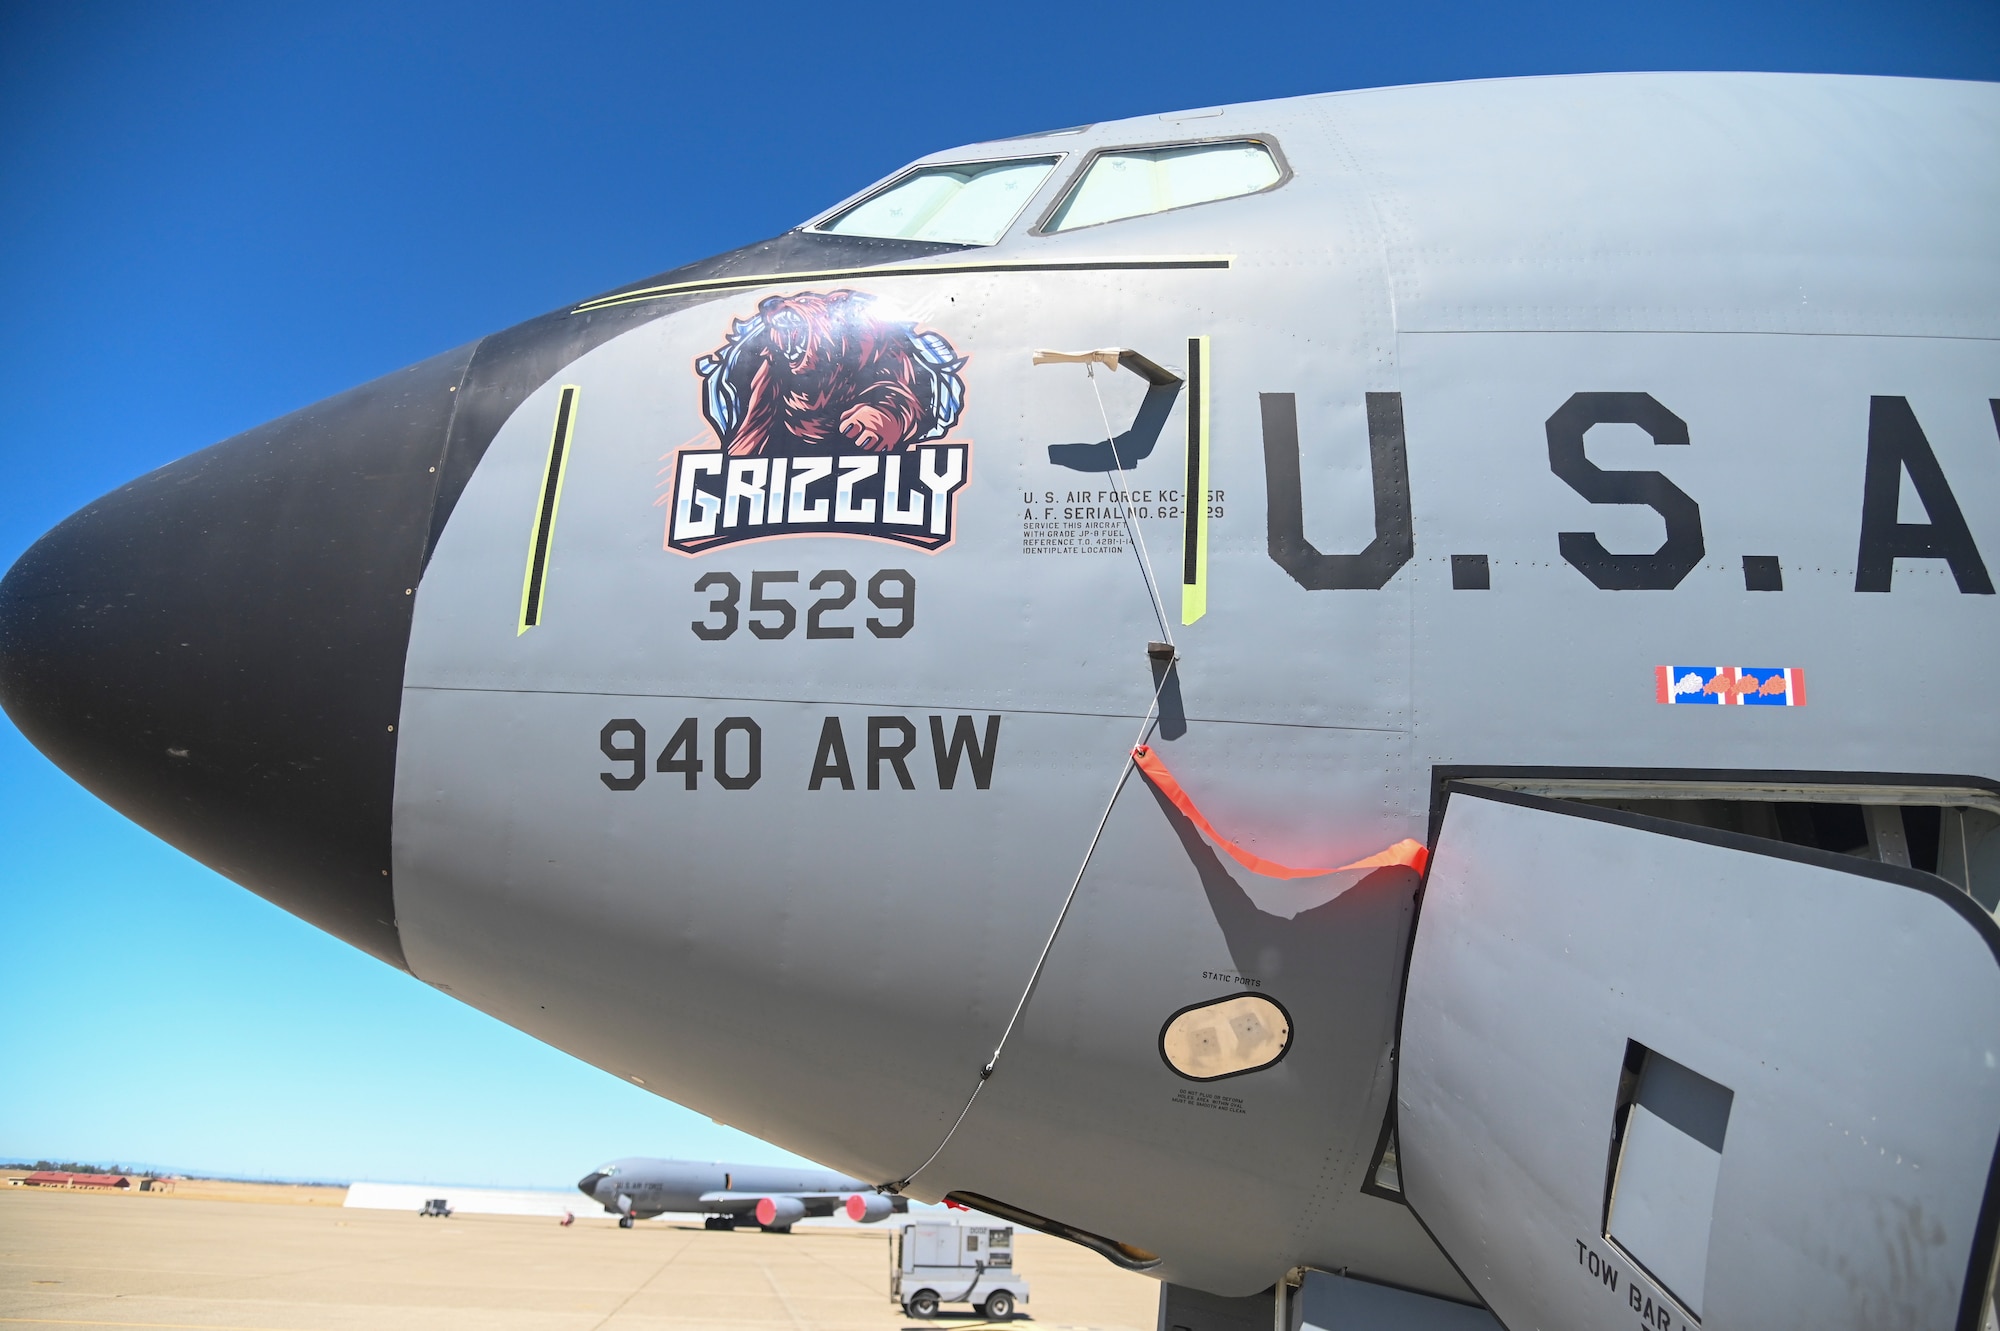 The “Grizzly” artwork is displayed on one of eight KC-135 Stratotankers belonging to the 940th Air Refueling Wing June 13, 2021, at Beale Air Force Base, California.